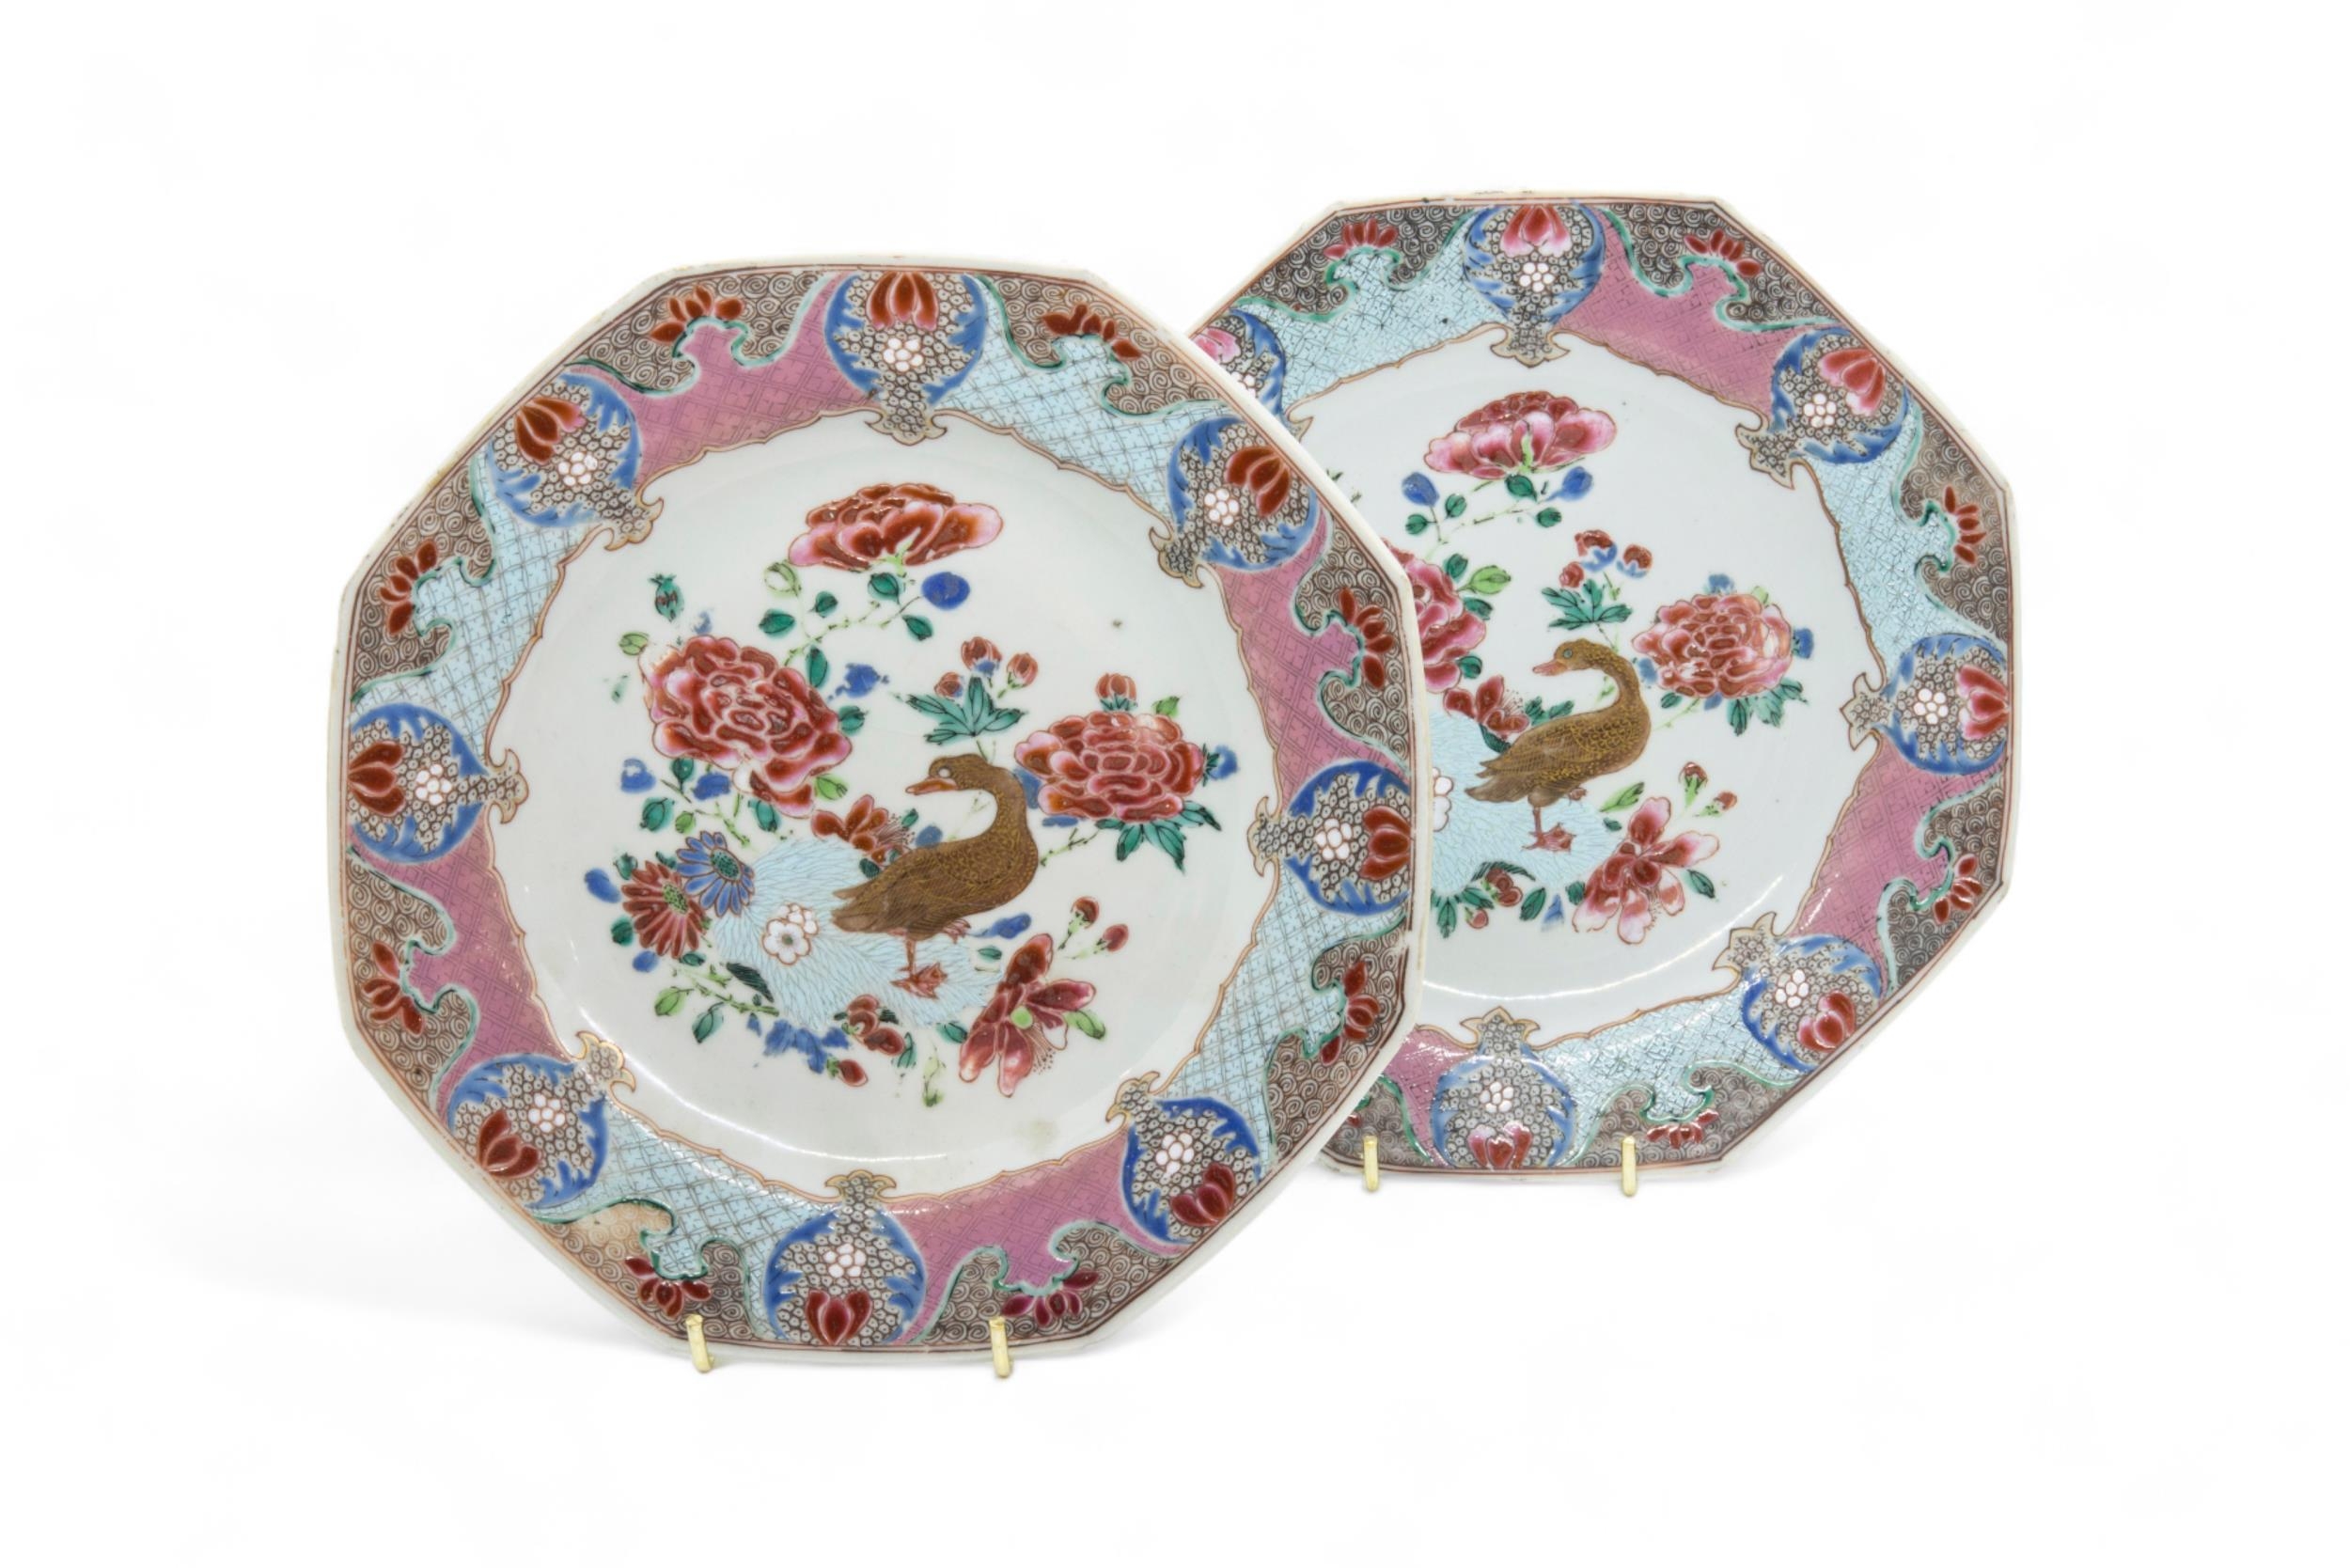 A GROUP OF FOURTEEN CHINESE EXPORT DISHES QING DYNASTY, 18TH CENTURY 22cm - 23cm diam approx - Image 3 of 8